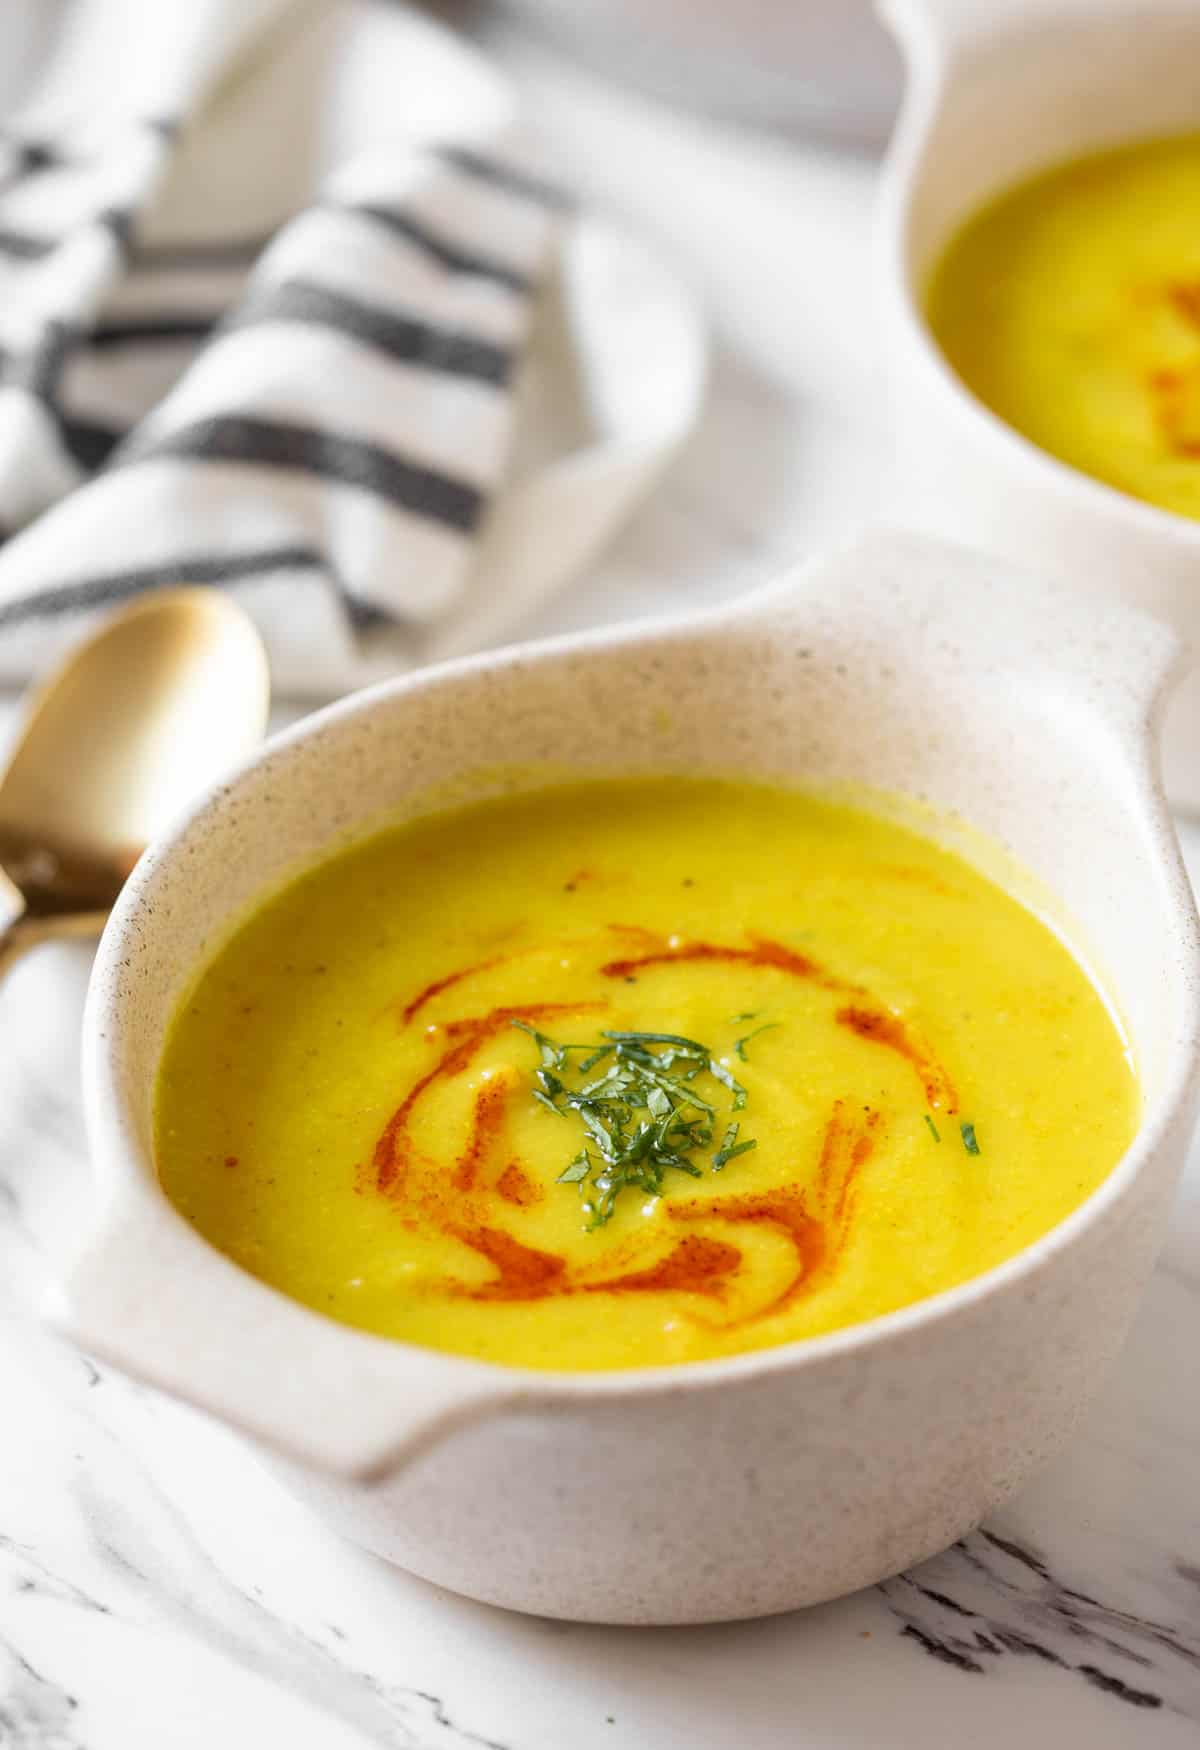 Bowl of yellow turmeric soup with green herbs garnished on top.